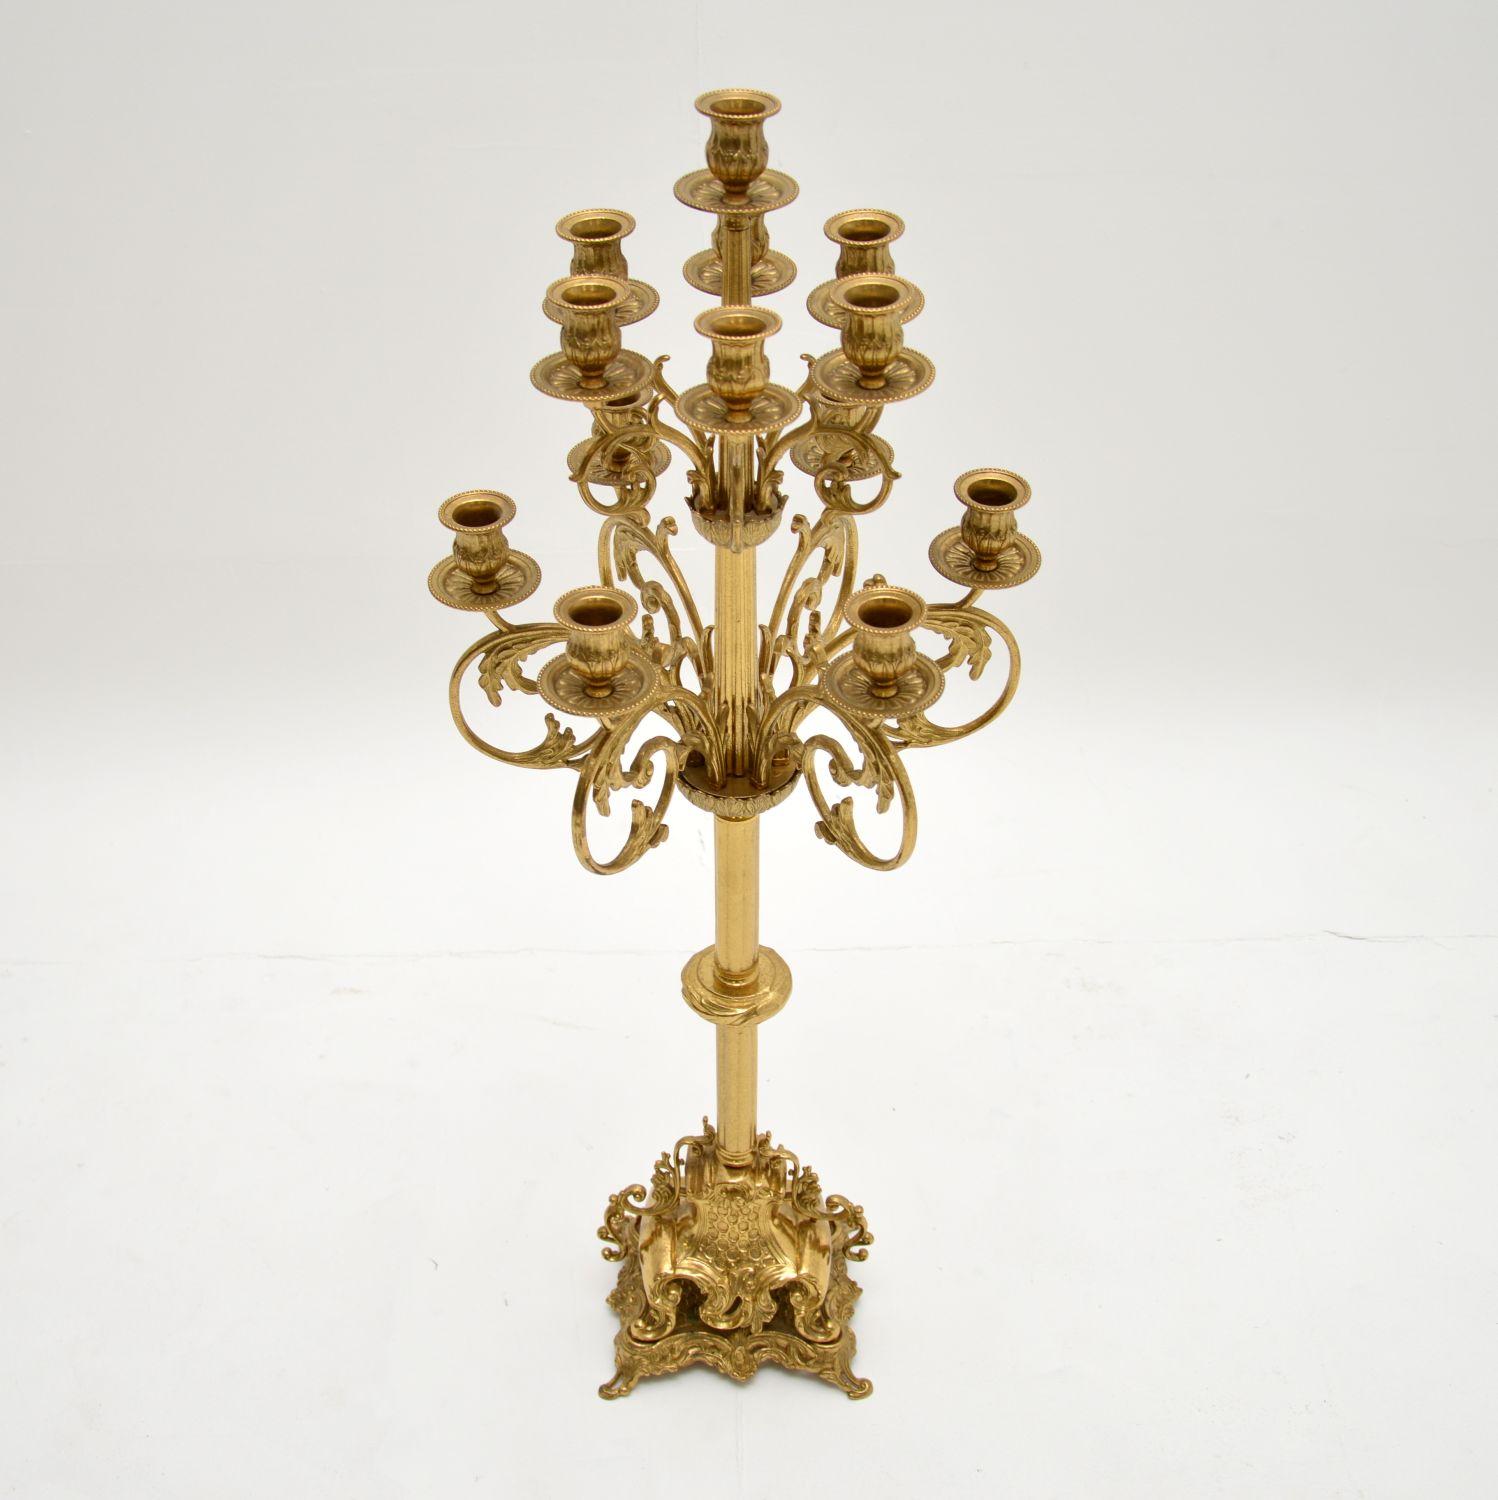 A stunning, very large and very impressive solid brass candelabra. This was made in Italy & dates from around the 1930-50’s.

The quality is superb, this has fine details throughout and is beautifully finished on all sides.

It is in excellent